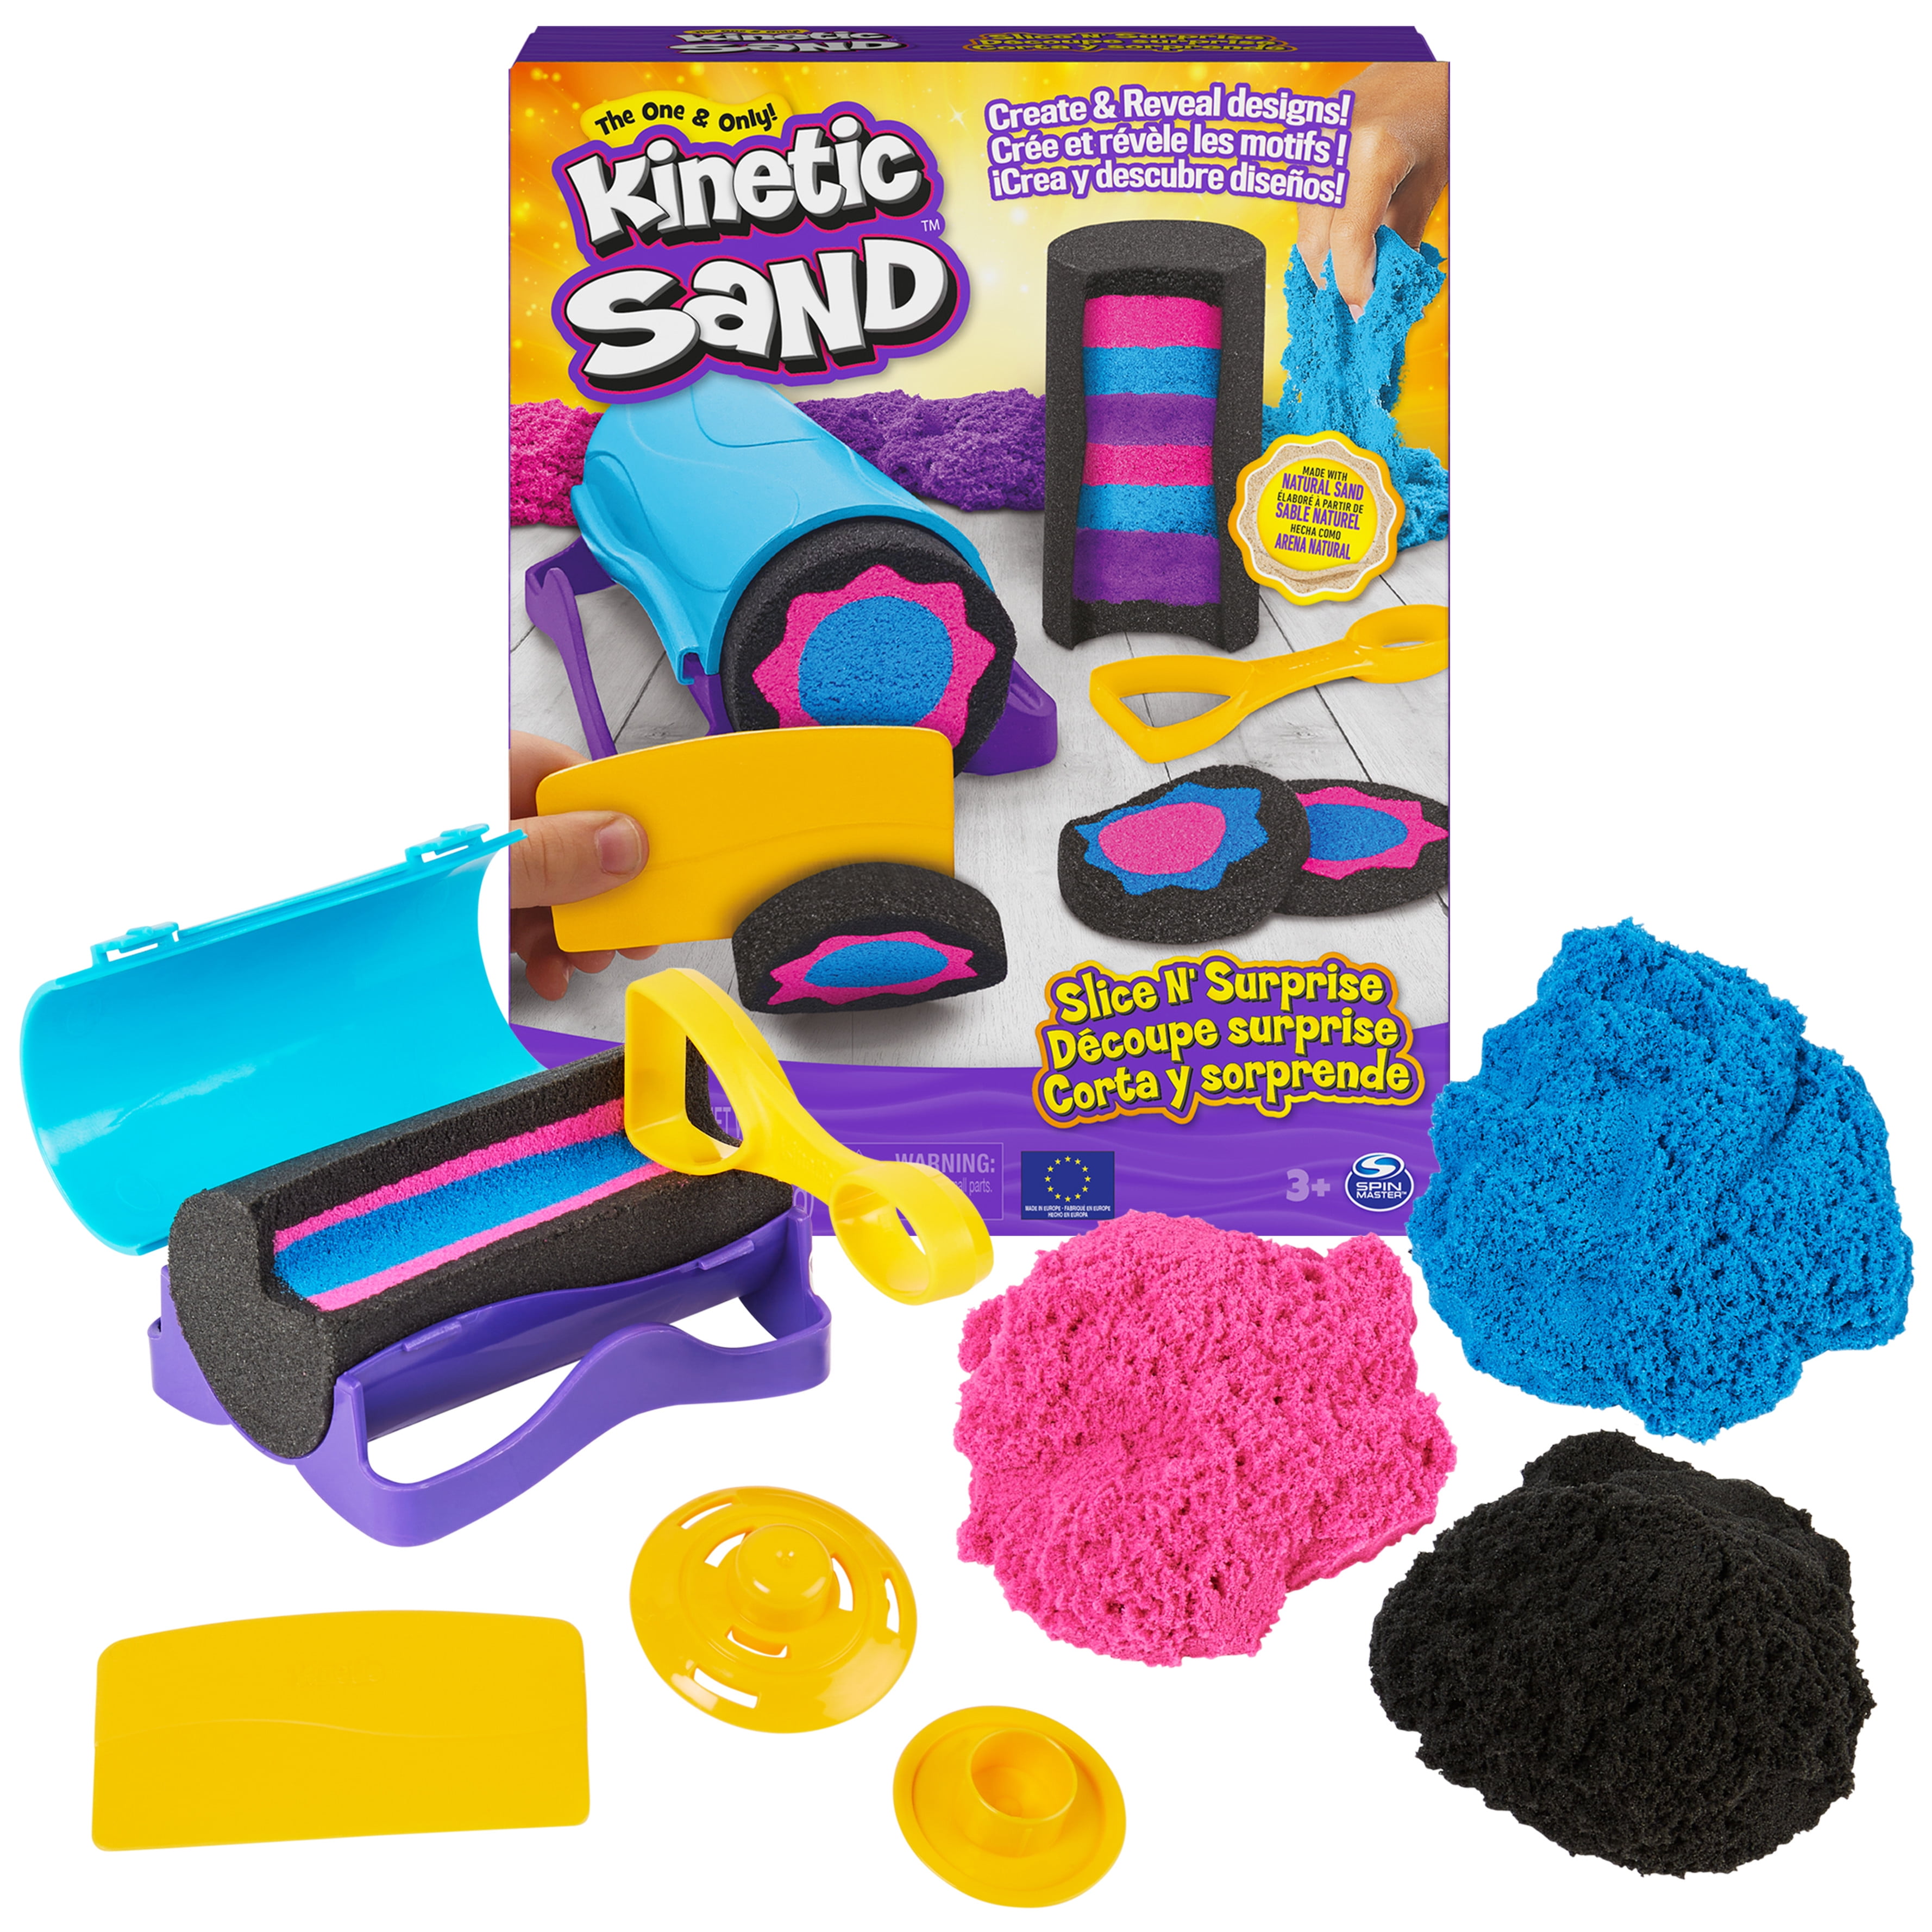 Kinetic Sand Slice N' Surprise with 13.5oz Sand (3 Colors) and 7